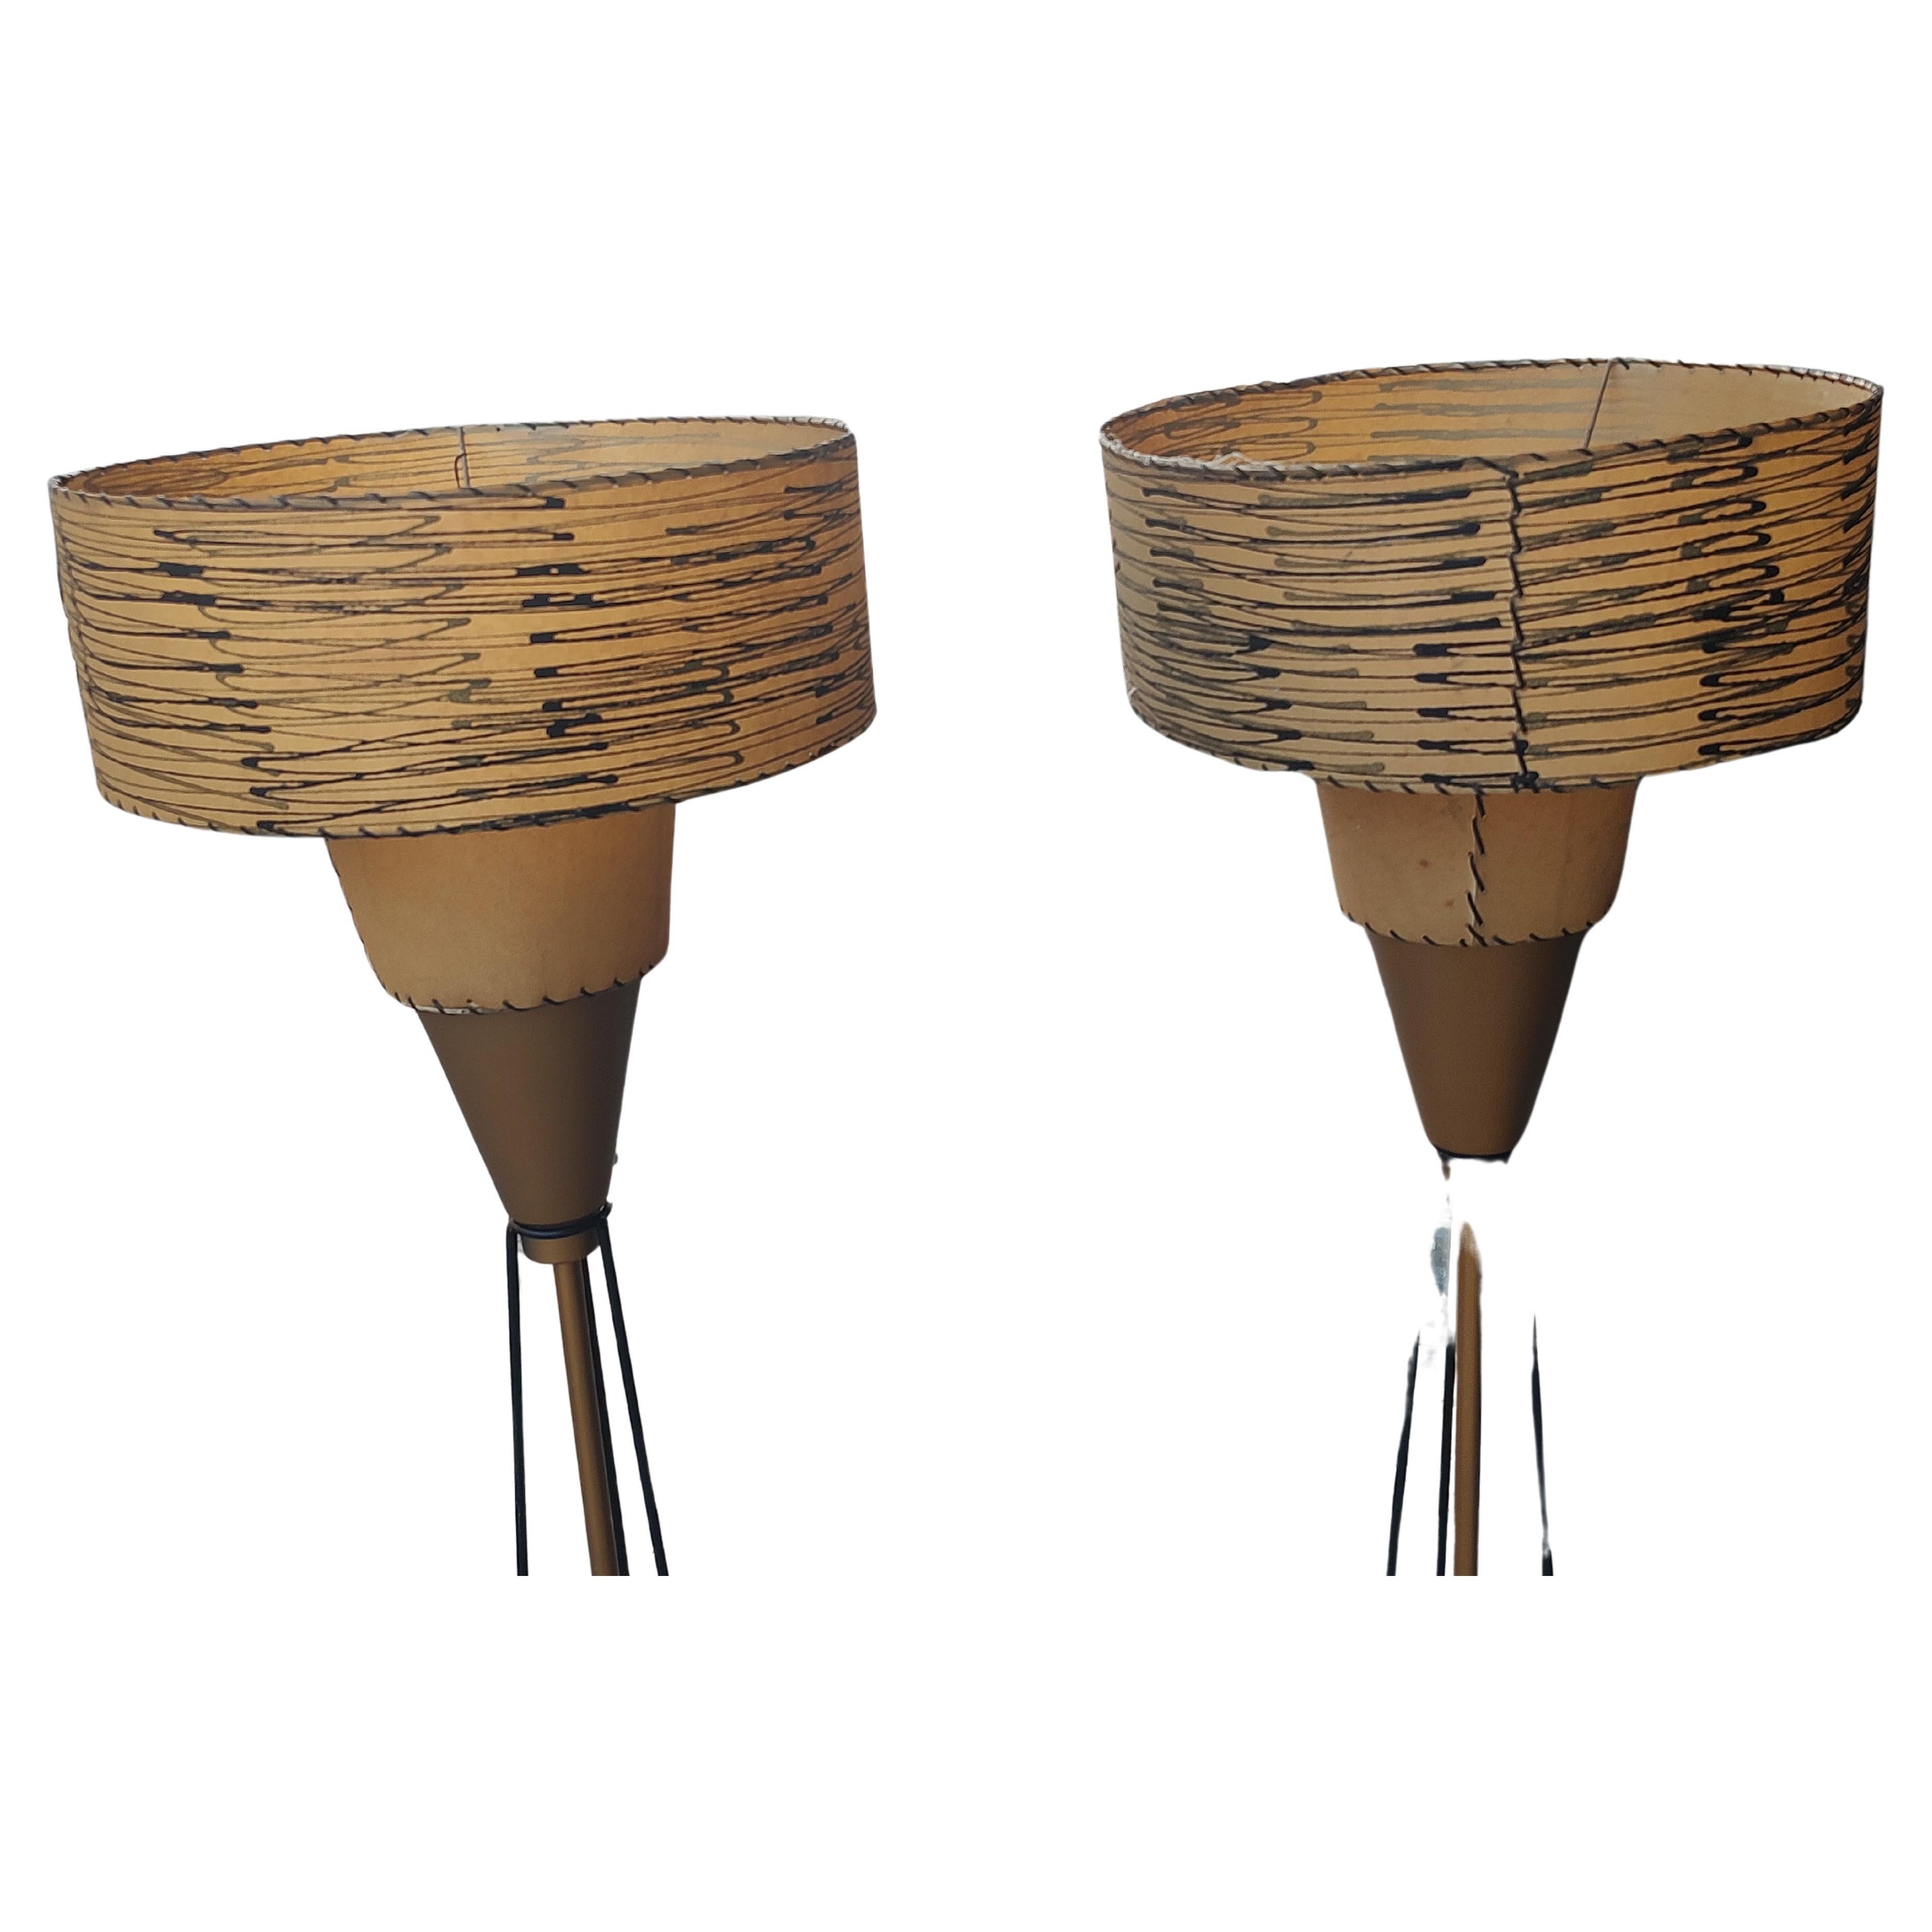 North American Pair of Mid Century Modern C1950s Floor Lamps Atomic Towers by Majestic Lamp Co. For Sale